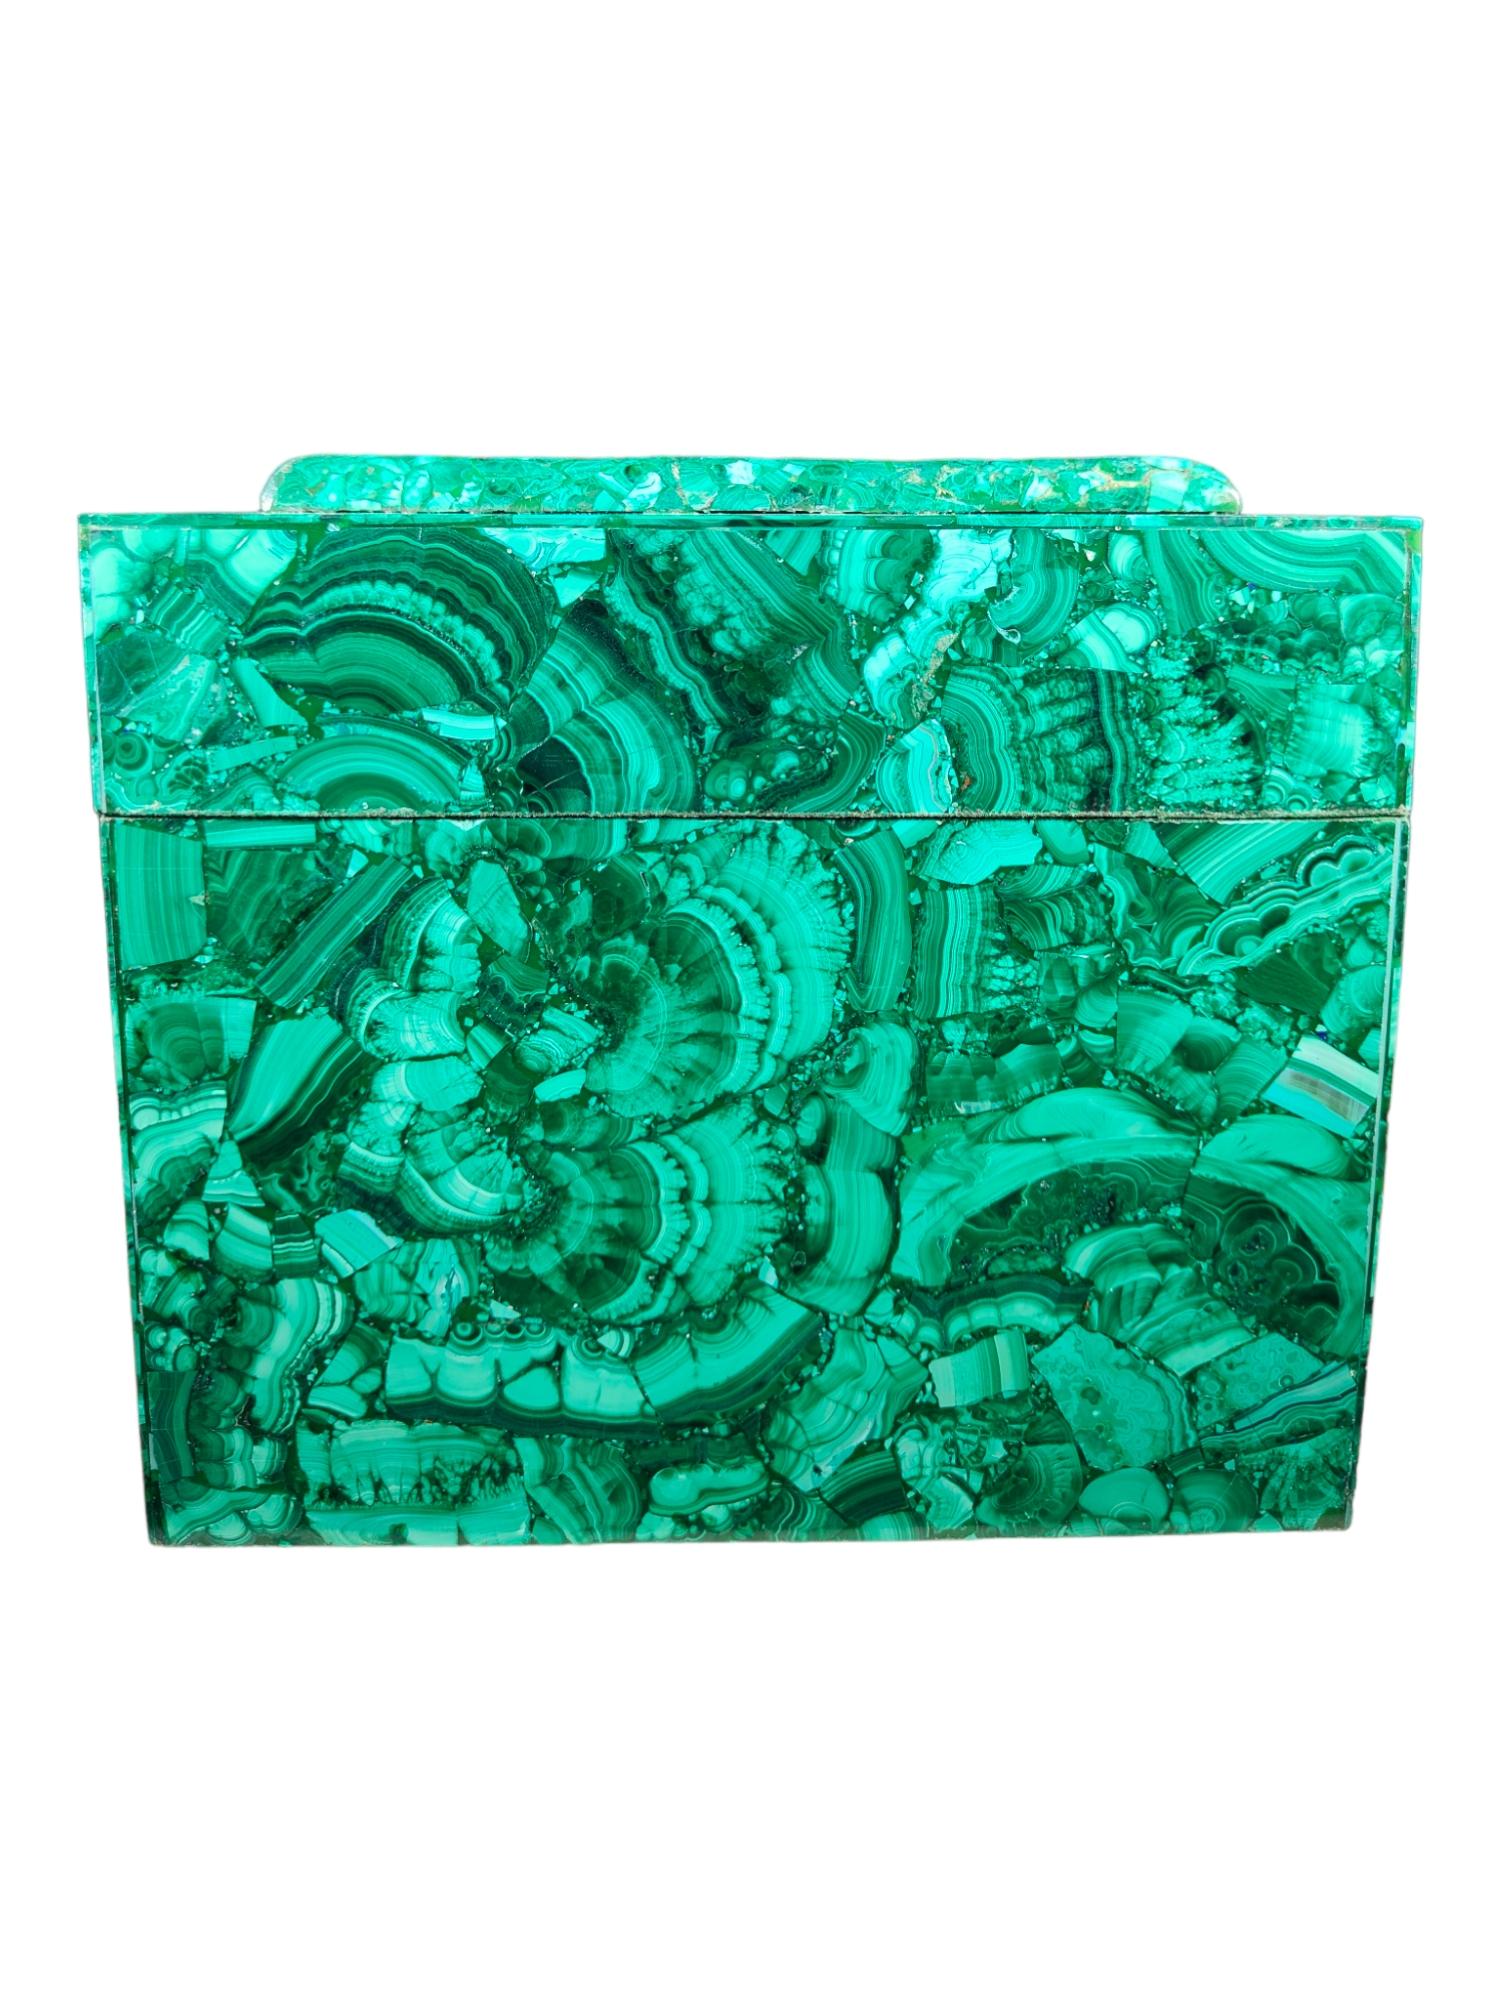 Large Malachite Box from the Mid-20th Century For Sale 5